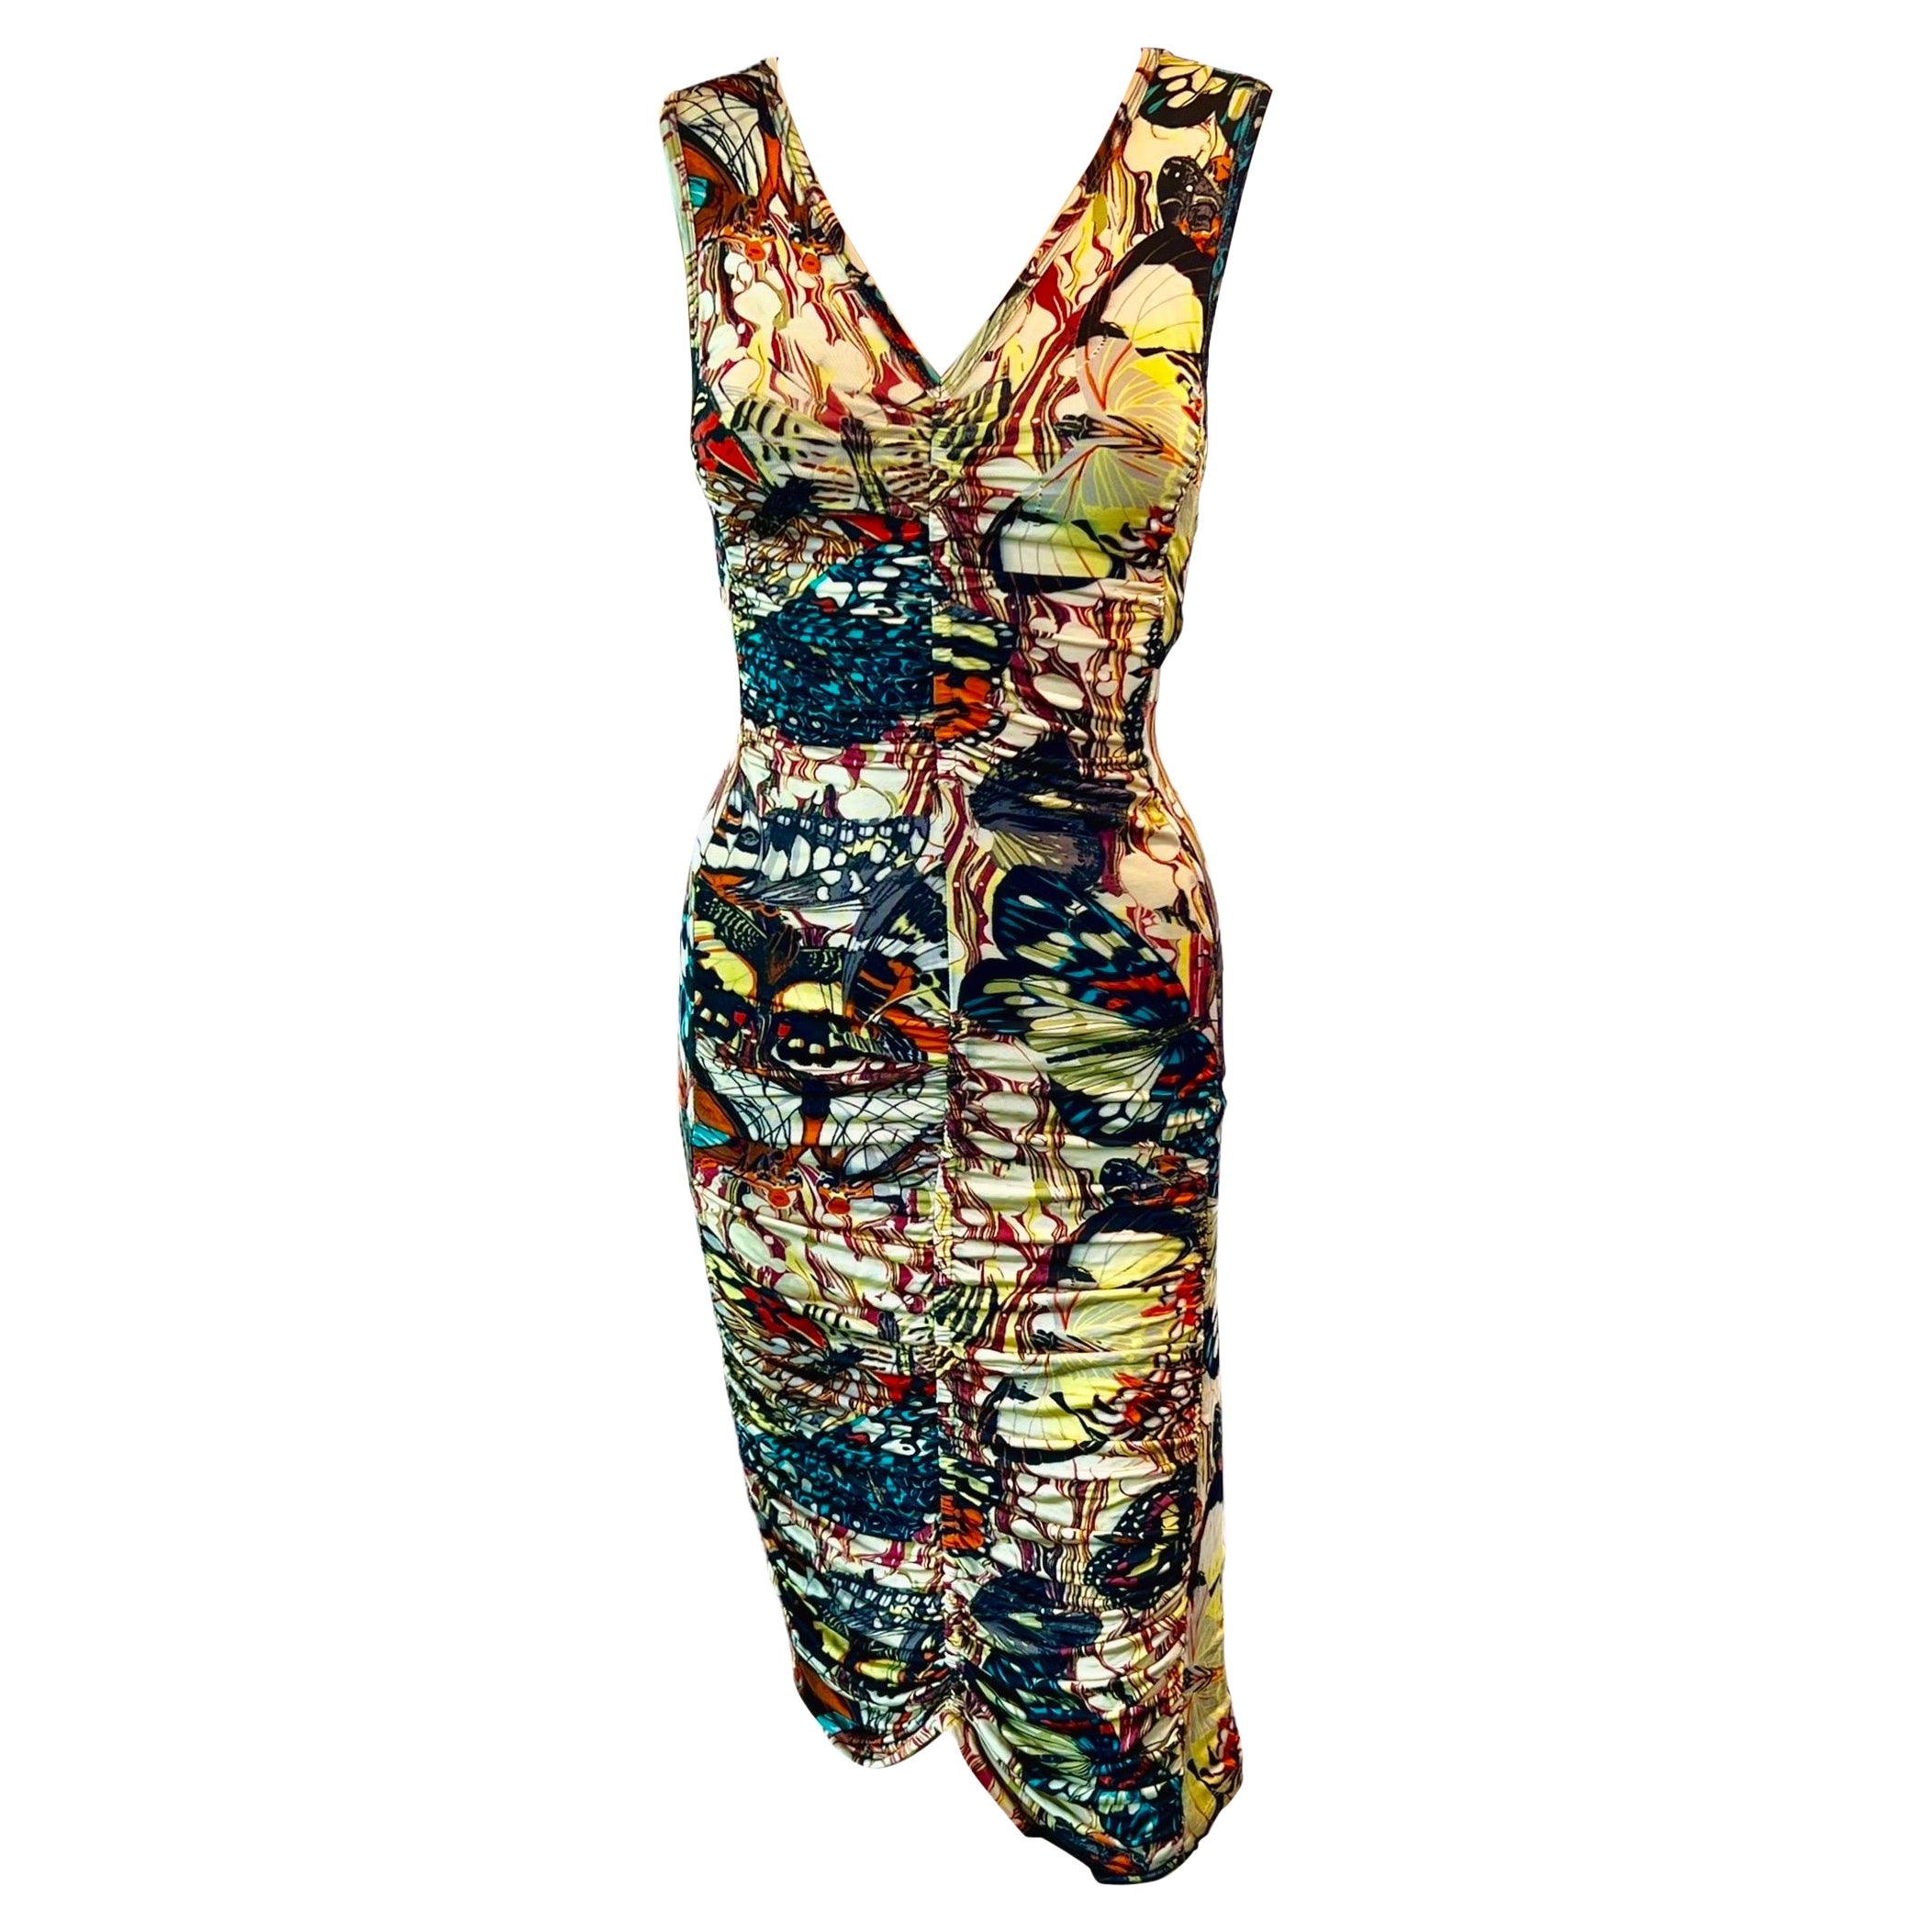 Jean Paul Gaultier Soleil S/S 2003 Butterfly Print Ruched Bodycon Mini Dress For Sale